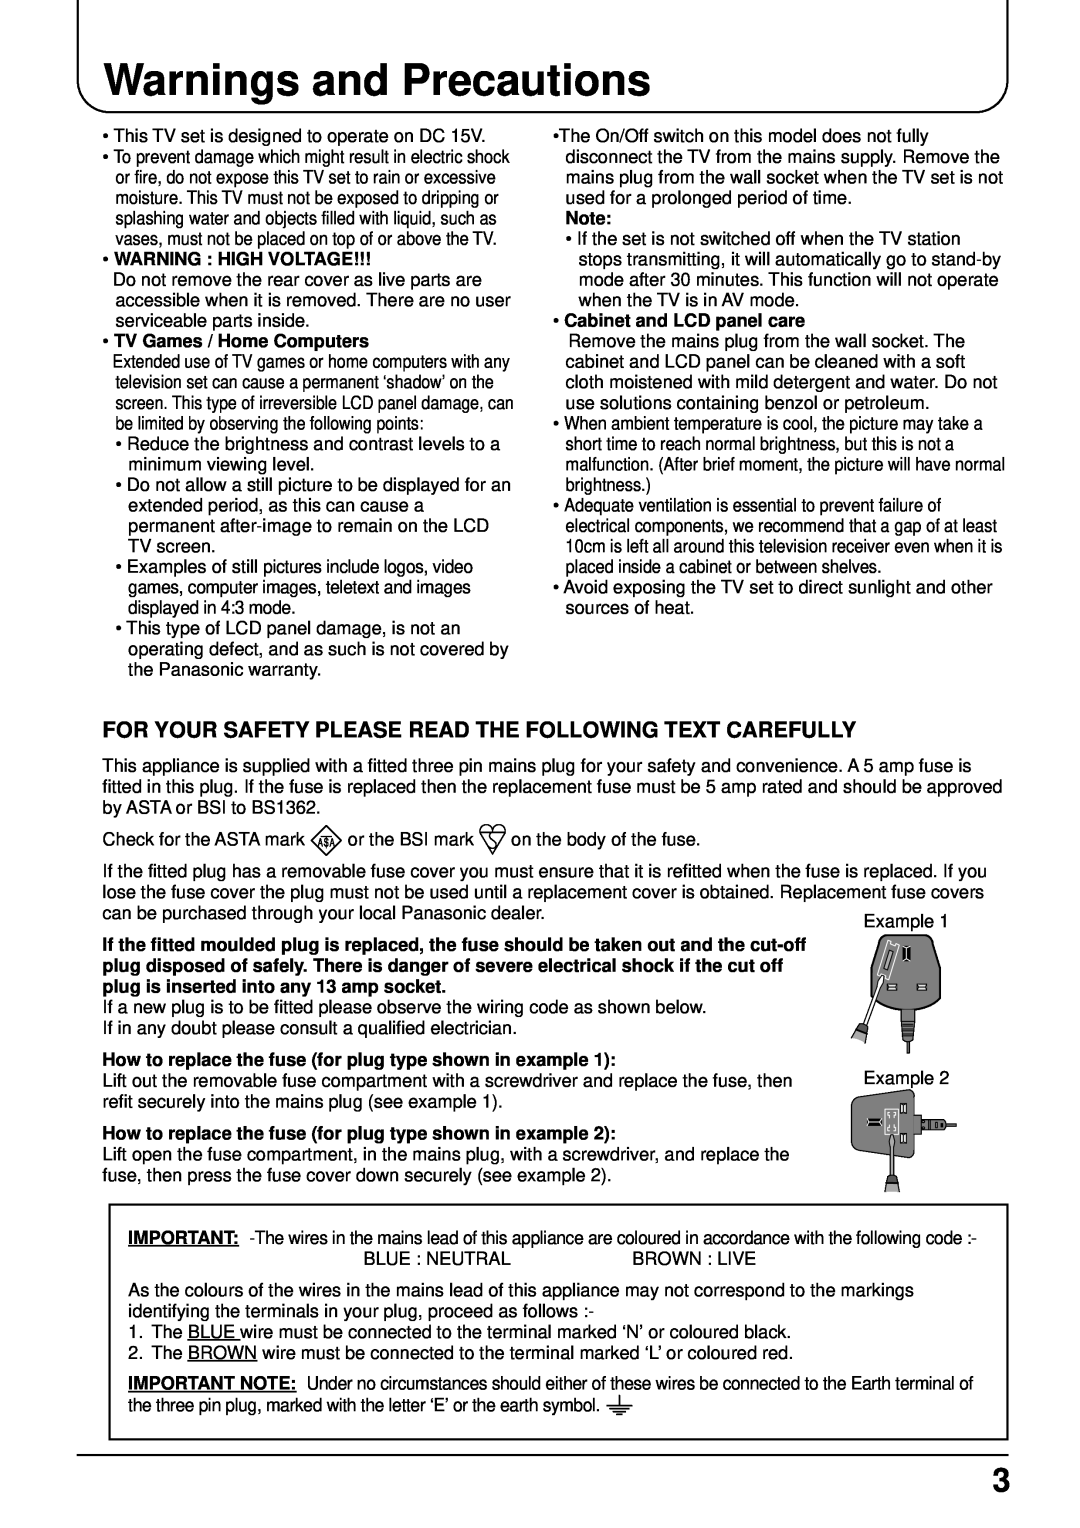 Panasonic TX-22LT2 Warnings and Precautions, Warning High Voltage, TV Games / Home Computers, Cabinet and LCD panel care 